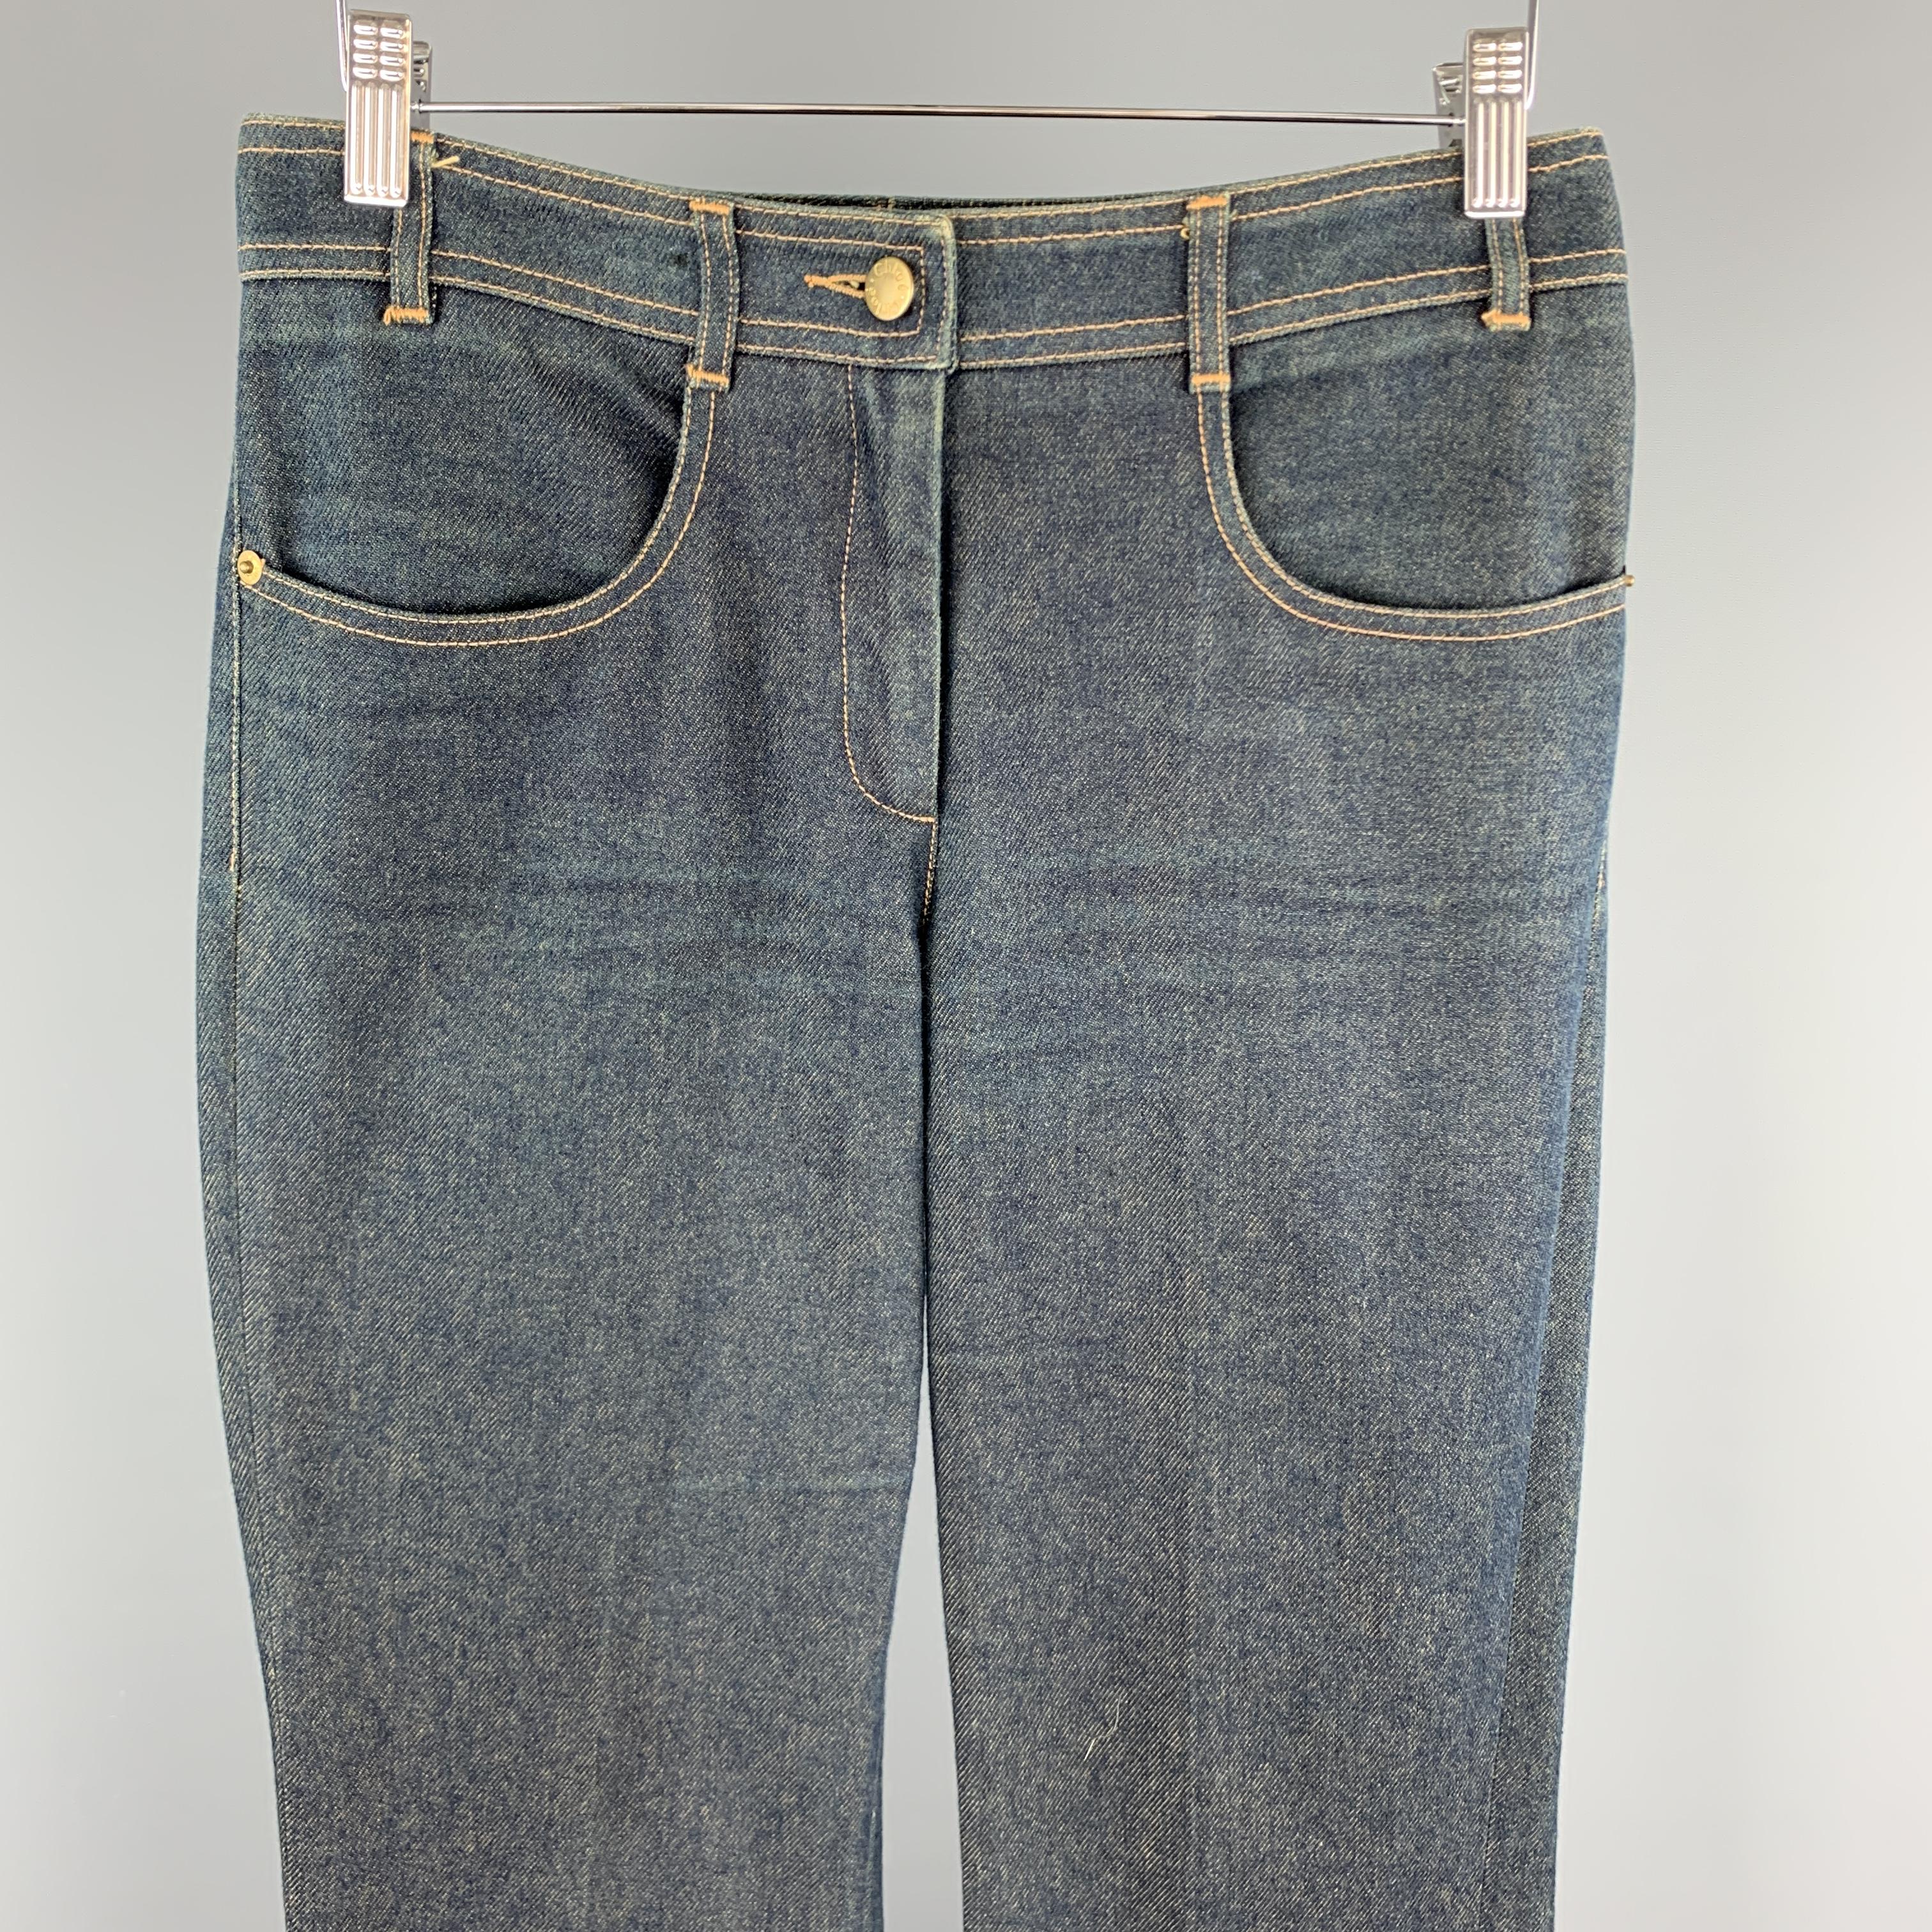 CHLOE jeans come in a dirty wash effect cotton denim with a high rise, retro fit, and bell bottom leg. Unhemmed. Made in France.

Excellent Pre-Owned Condition.
Marked: 30 in.
 
Measurements:

Waist: 30 in.
Rise: 10 in.
Inseam: 37 in.